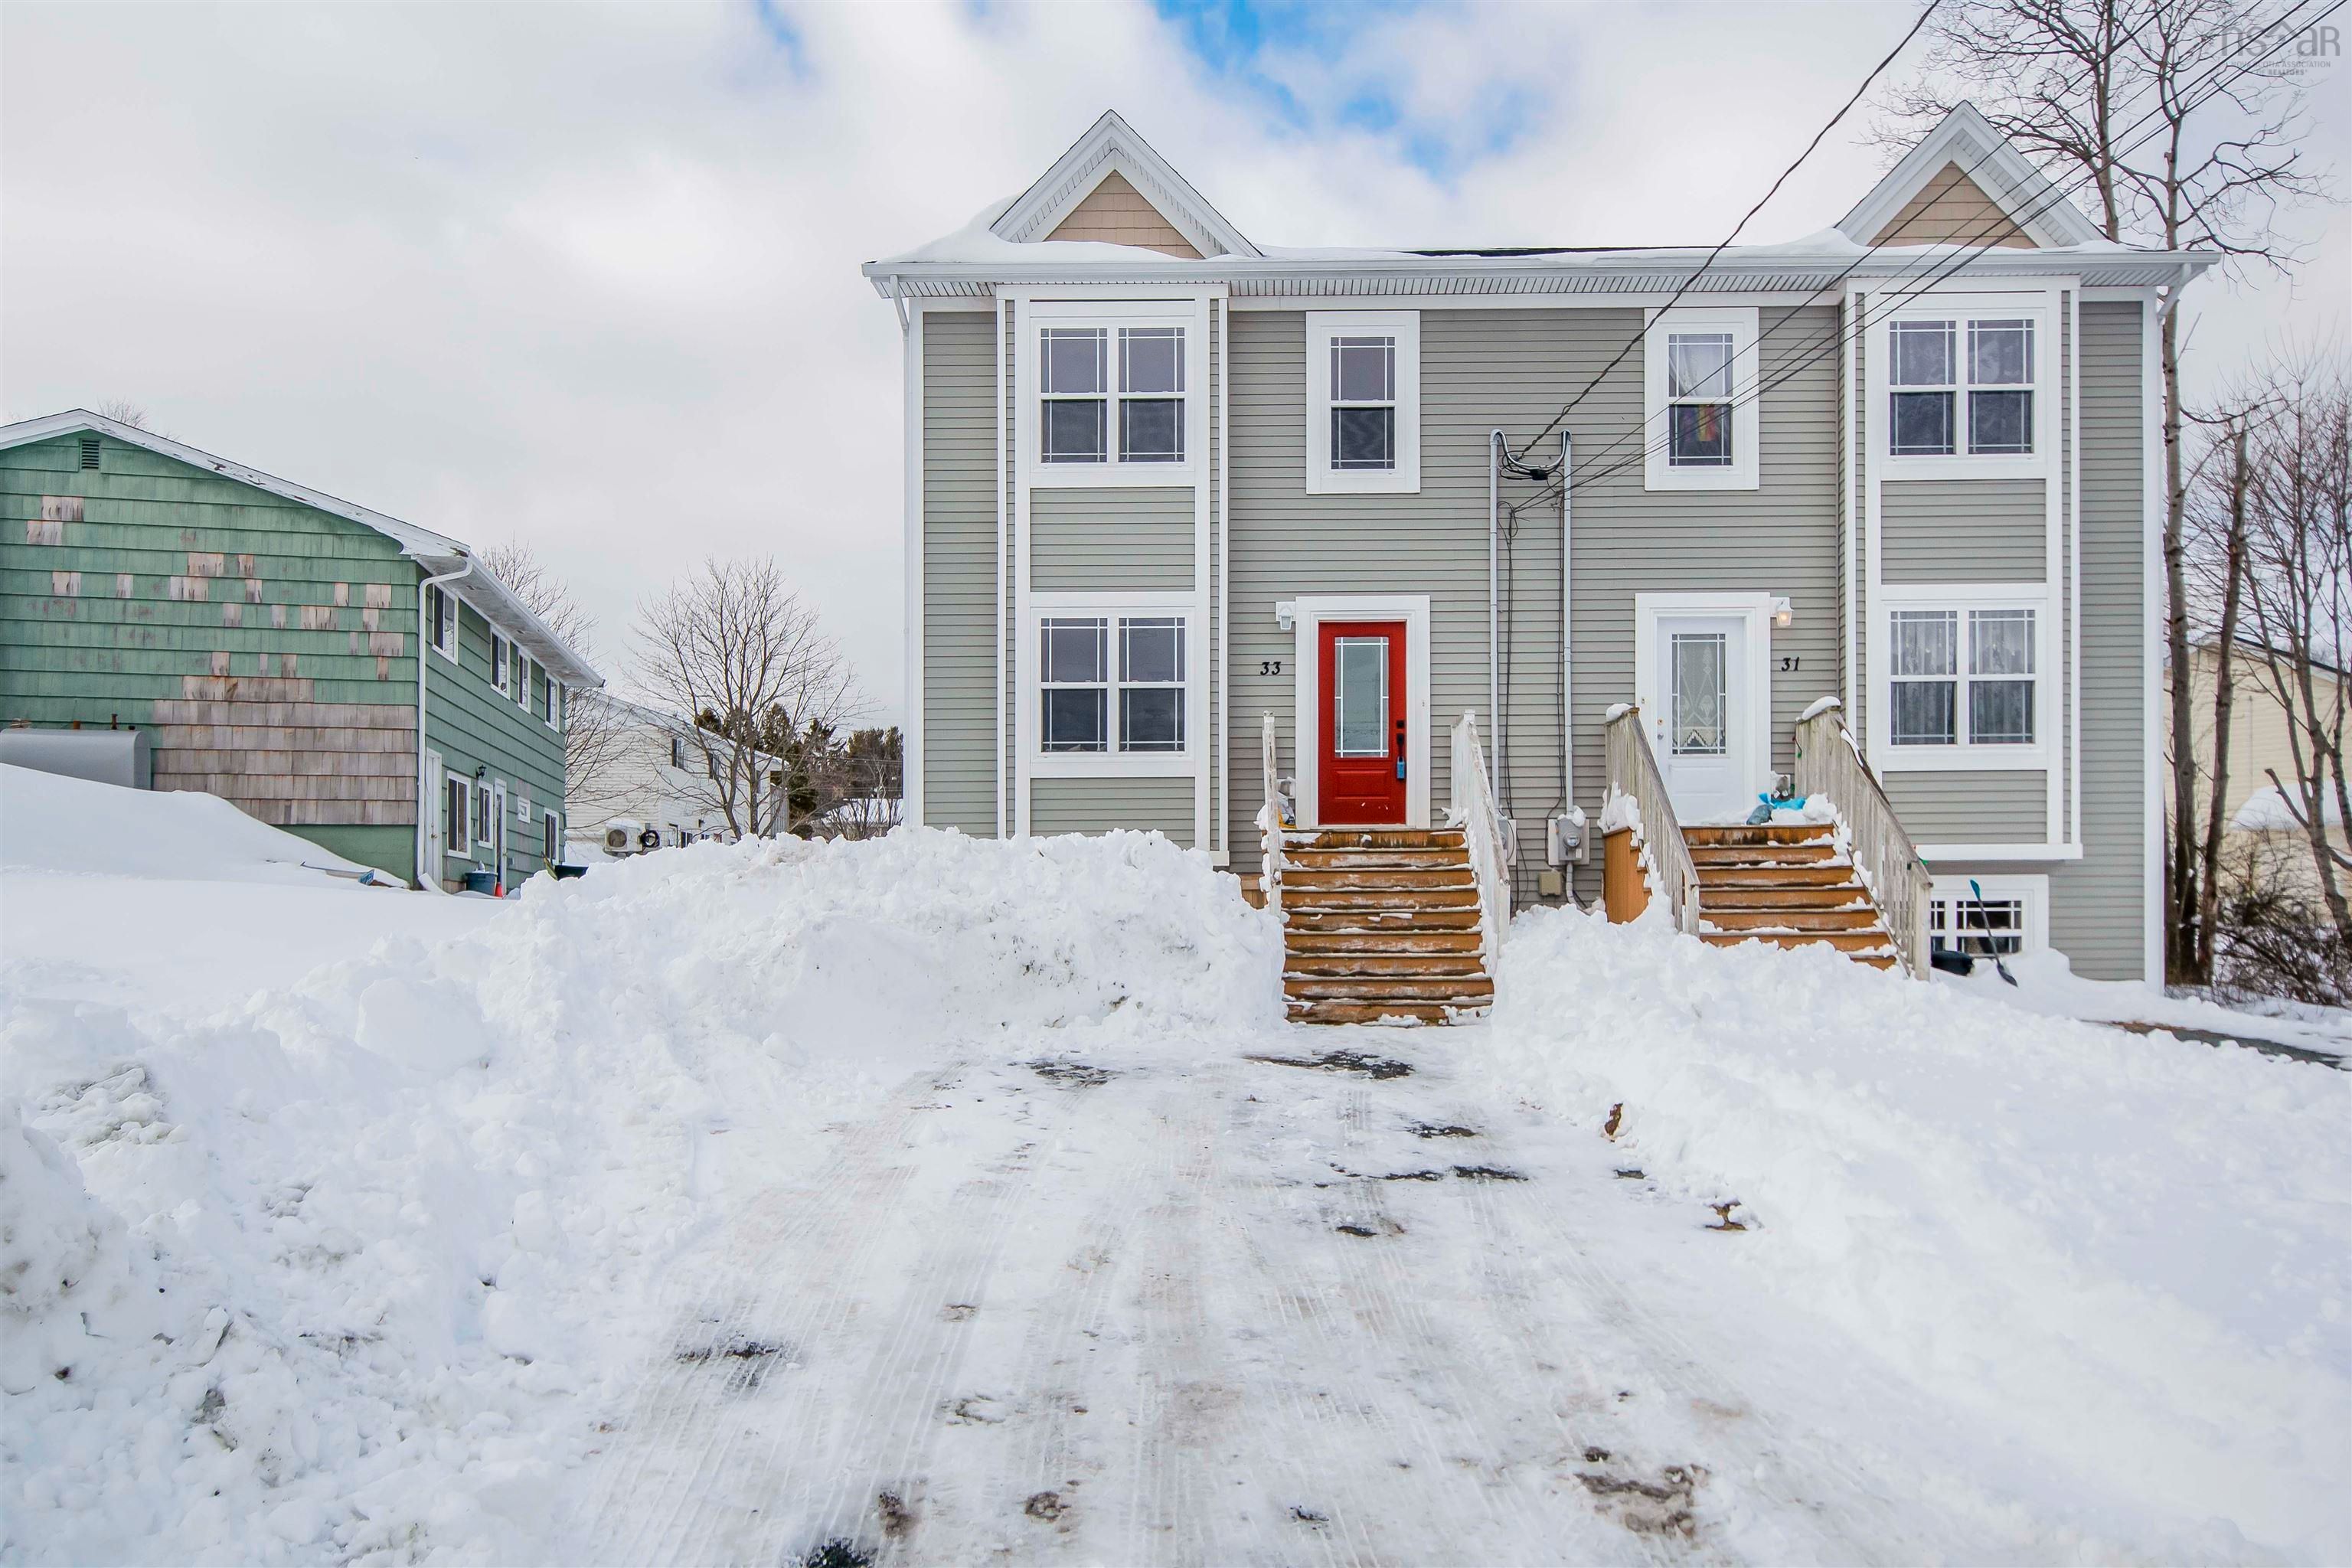 Main Photo: 33 Dorothy Crescent in Timberlea: 40-Timberlea, Prospect, St. Marg Residential for sale (Halifax-Dartmouth)  : MLS®# 202402380